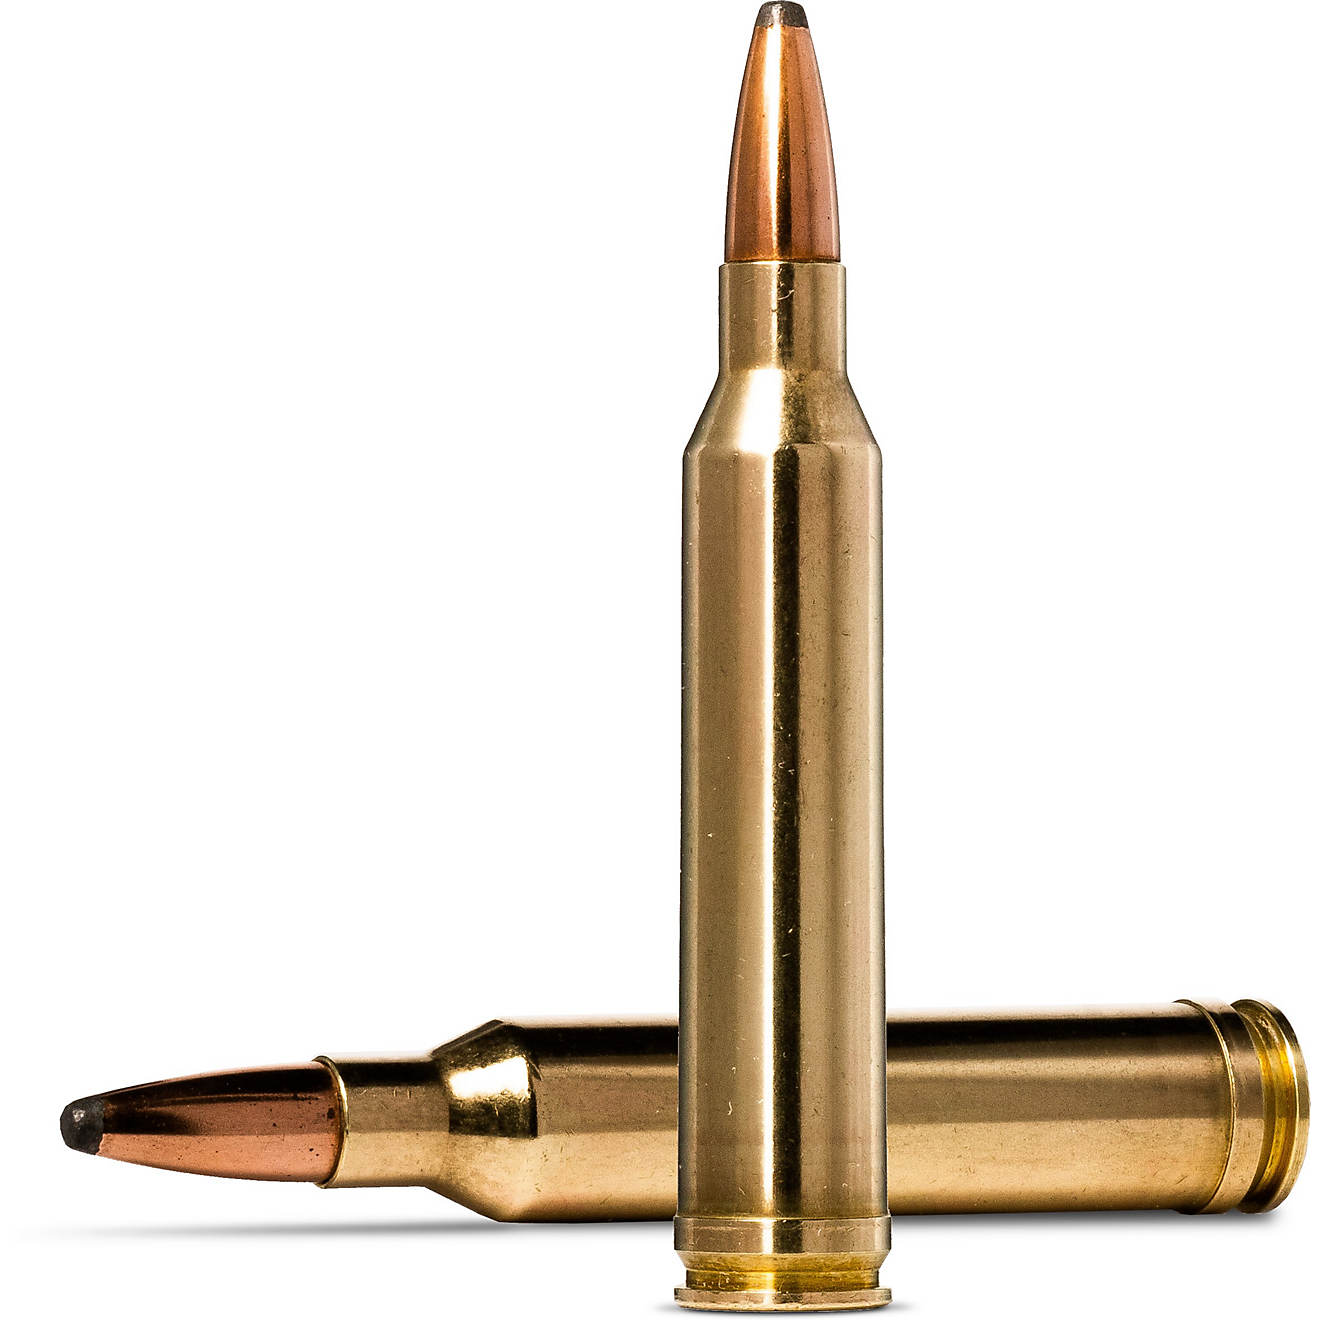 Norma USA Whitetail 7mm Remington Magnum 150-Grain Centerfire Rifle Ammunition - 20 Rounds                                       - view number 1